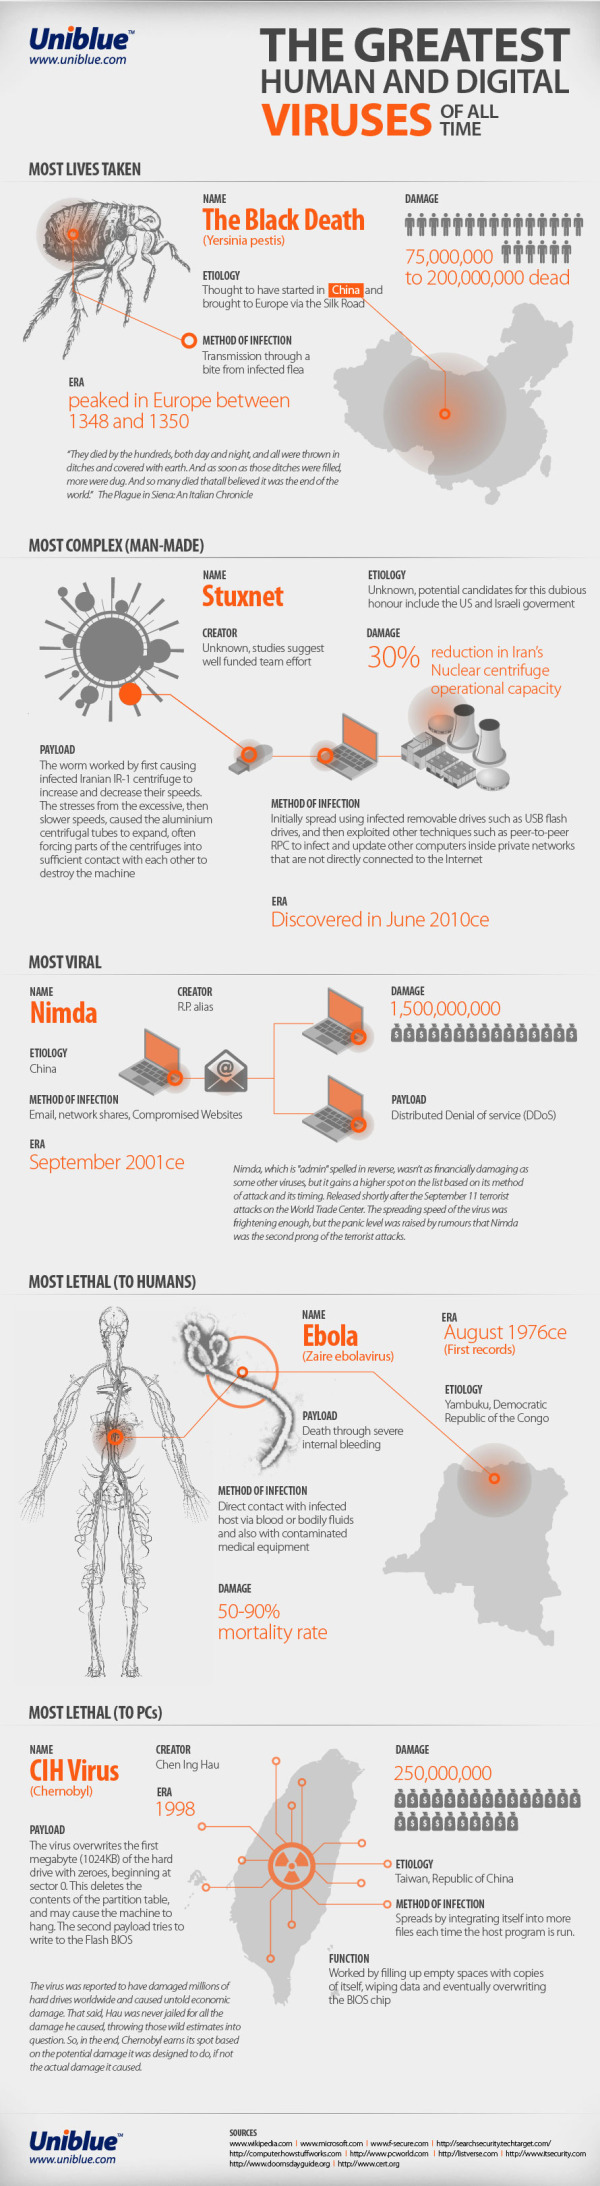 The Greatest Human and Digital Viruses of All Time infographic